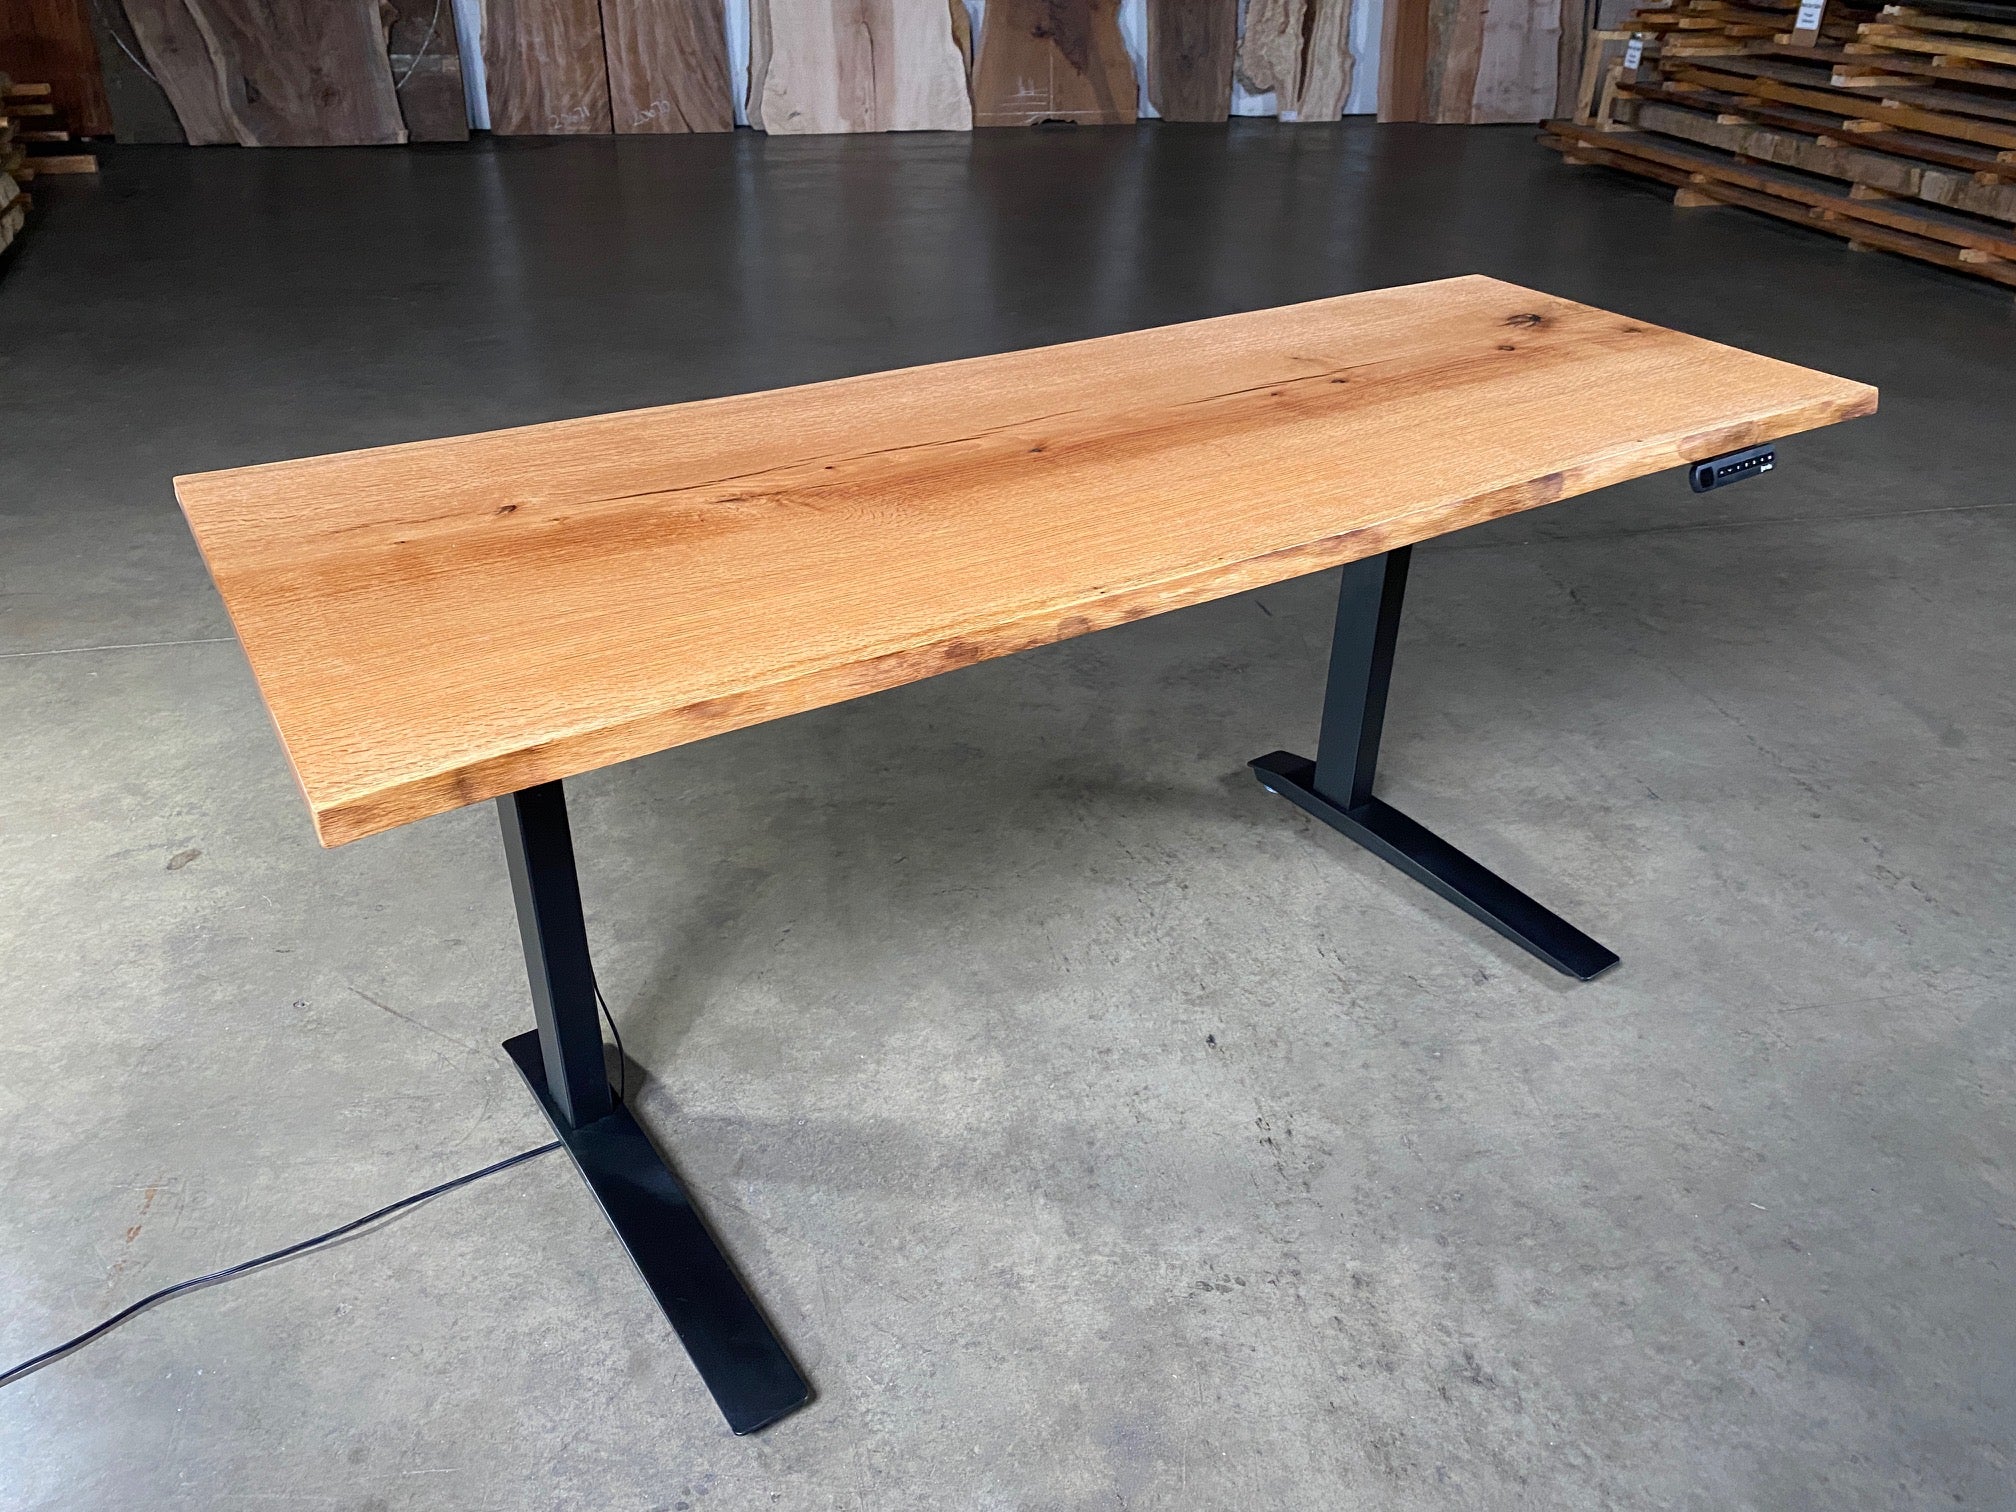 Live Edge Sit-Stand Adjustable Height Desk from CS Woods